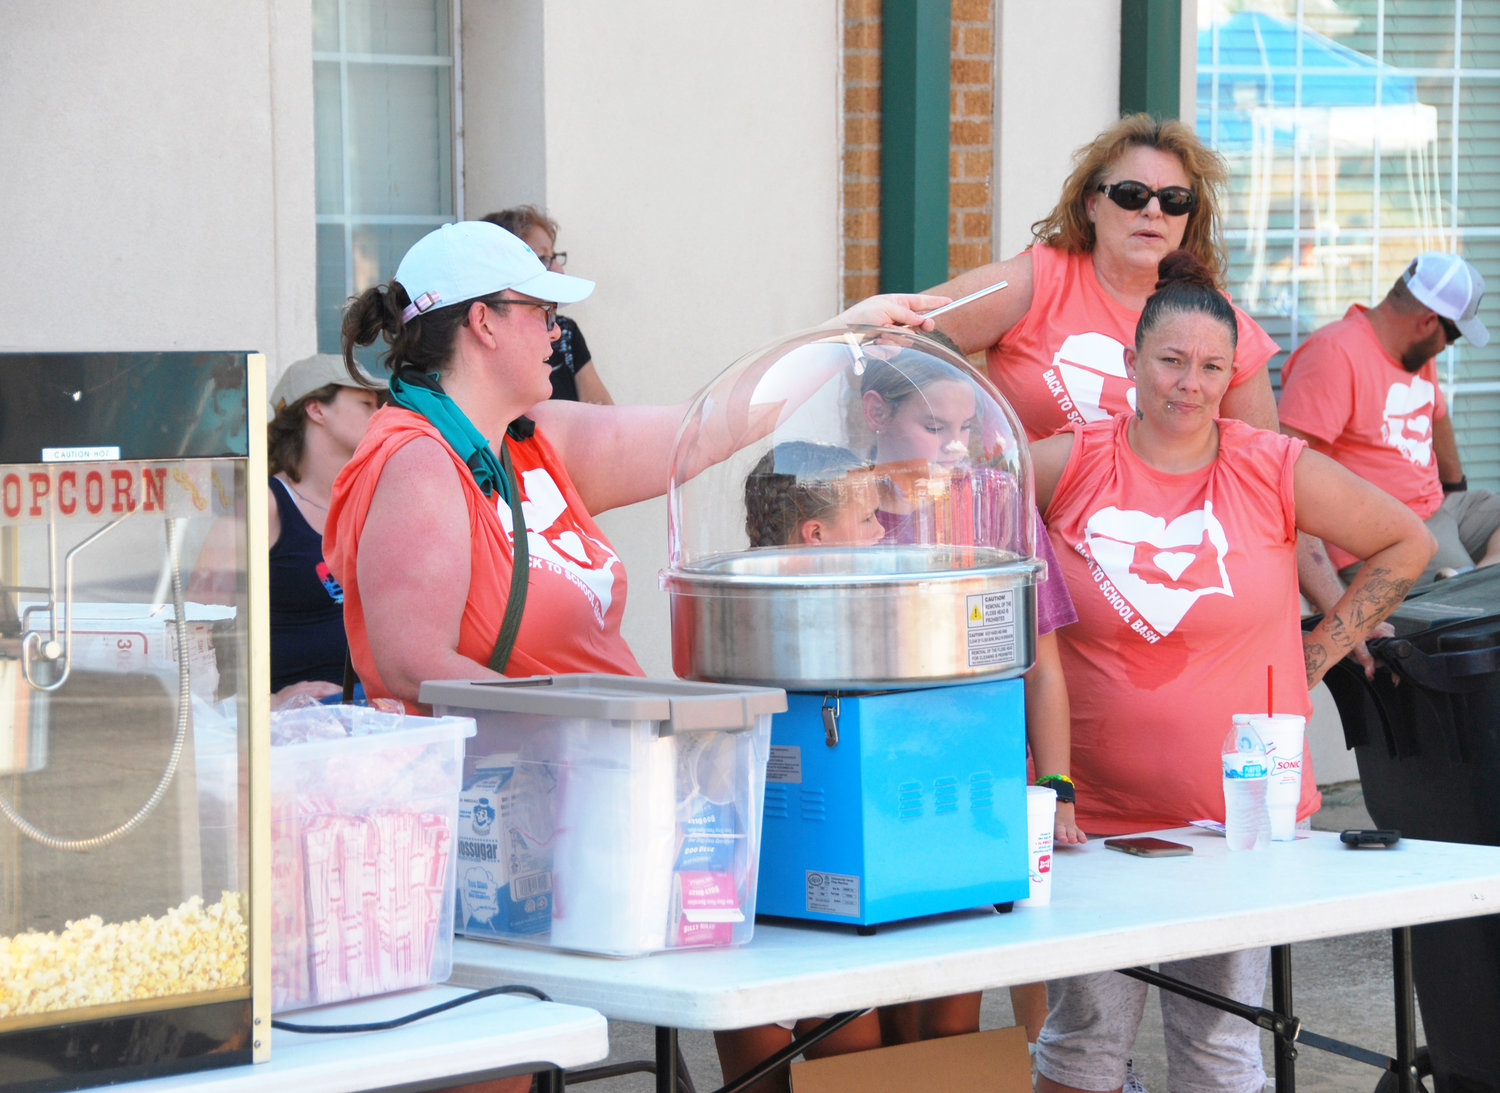 Popcorn and cotton candy were popular items for folks attending the annual Back to School Bash at Main and Second last Saturday afternoon.